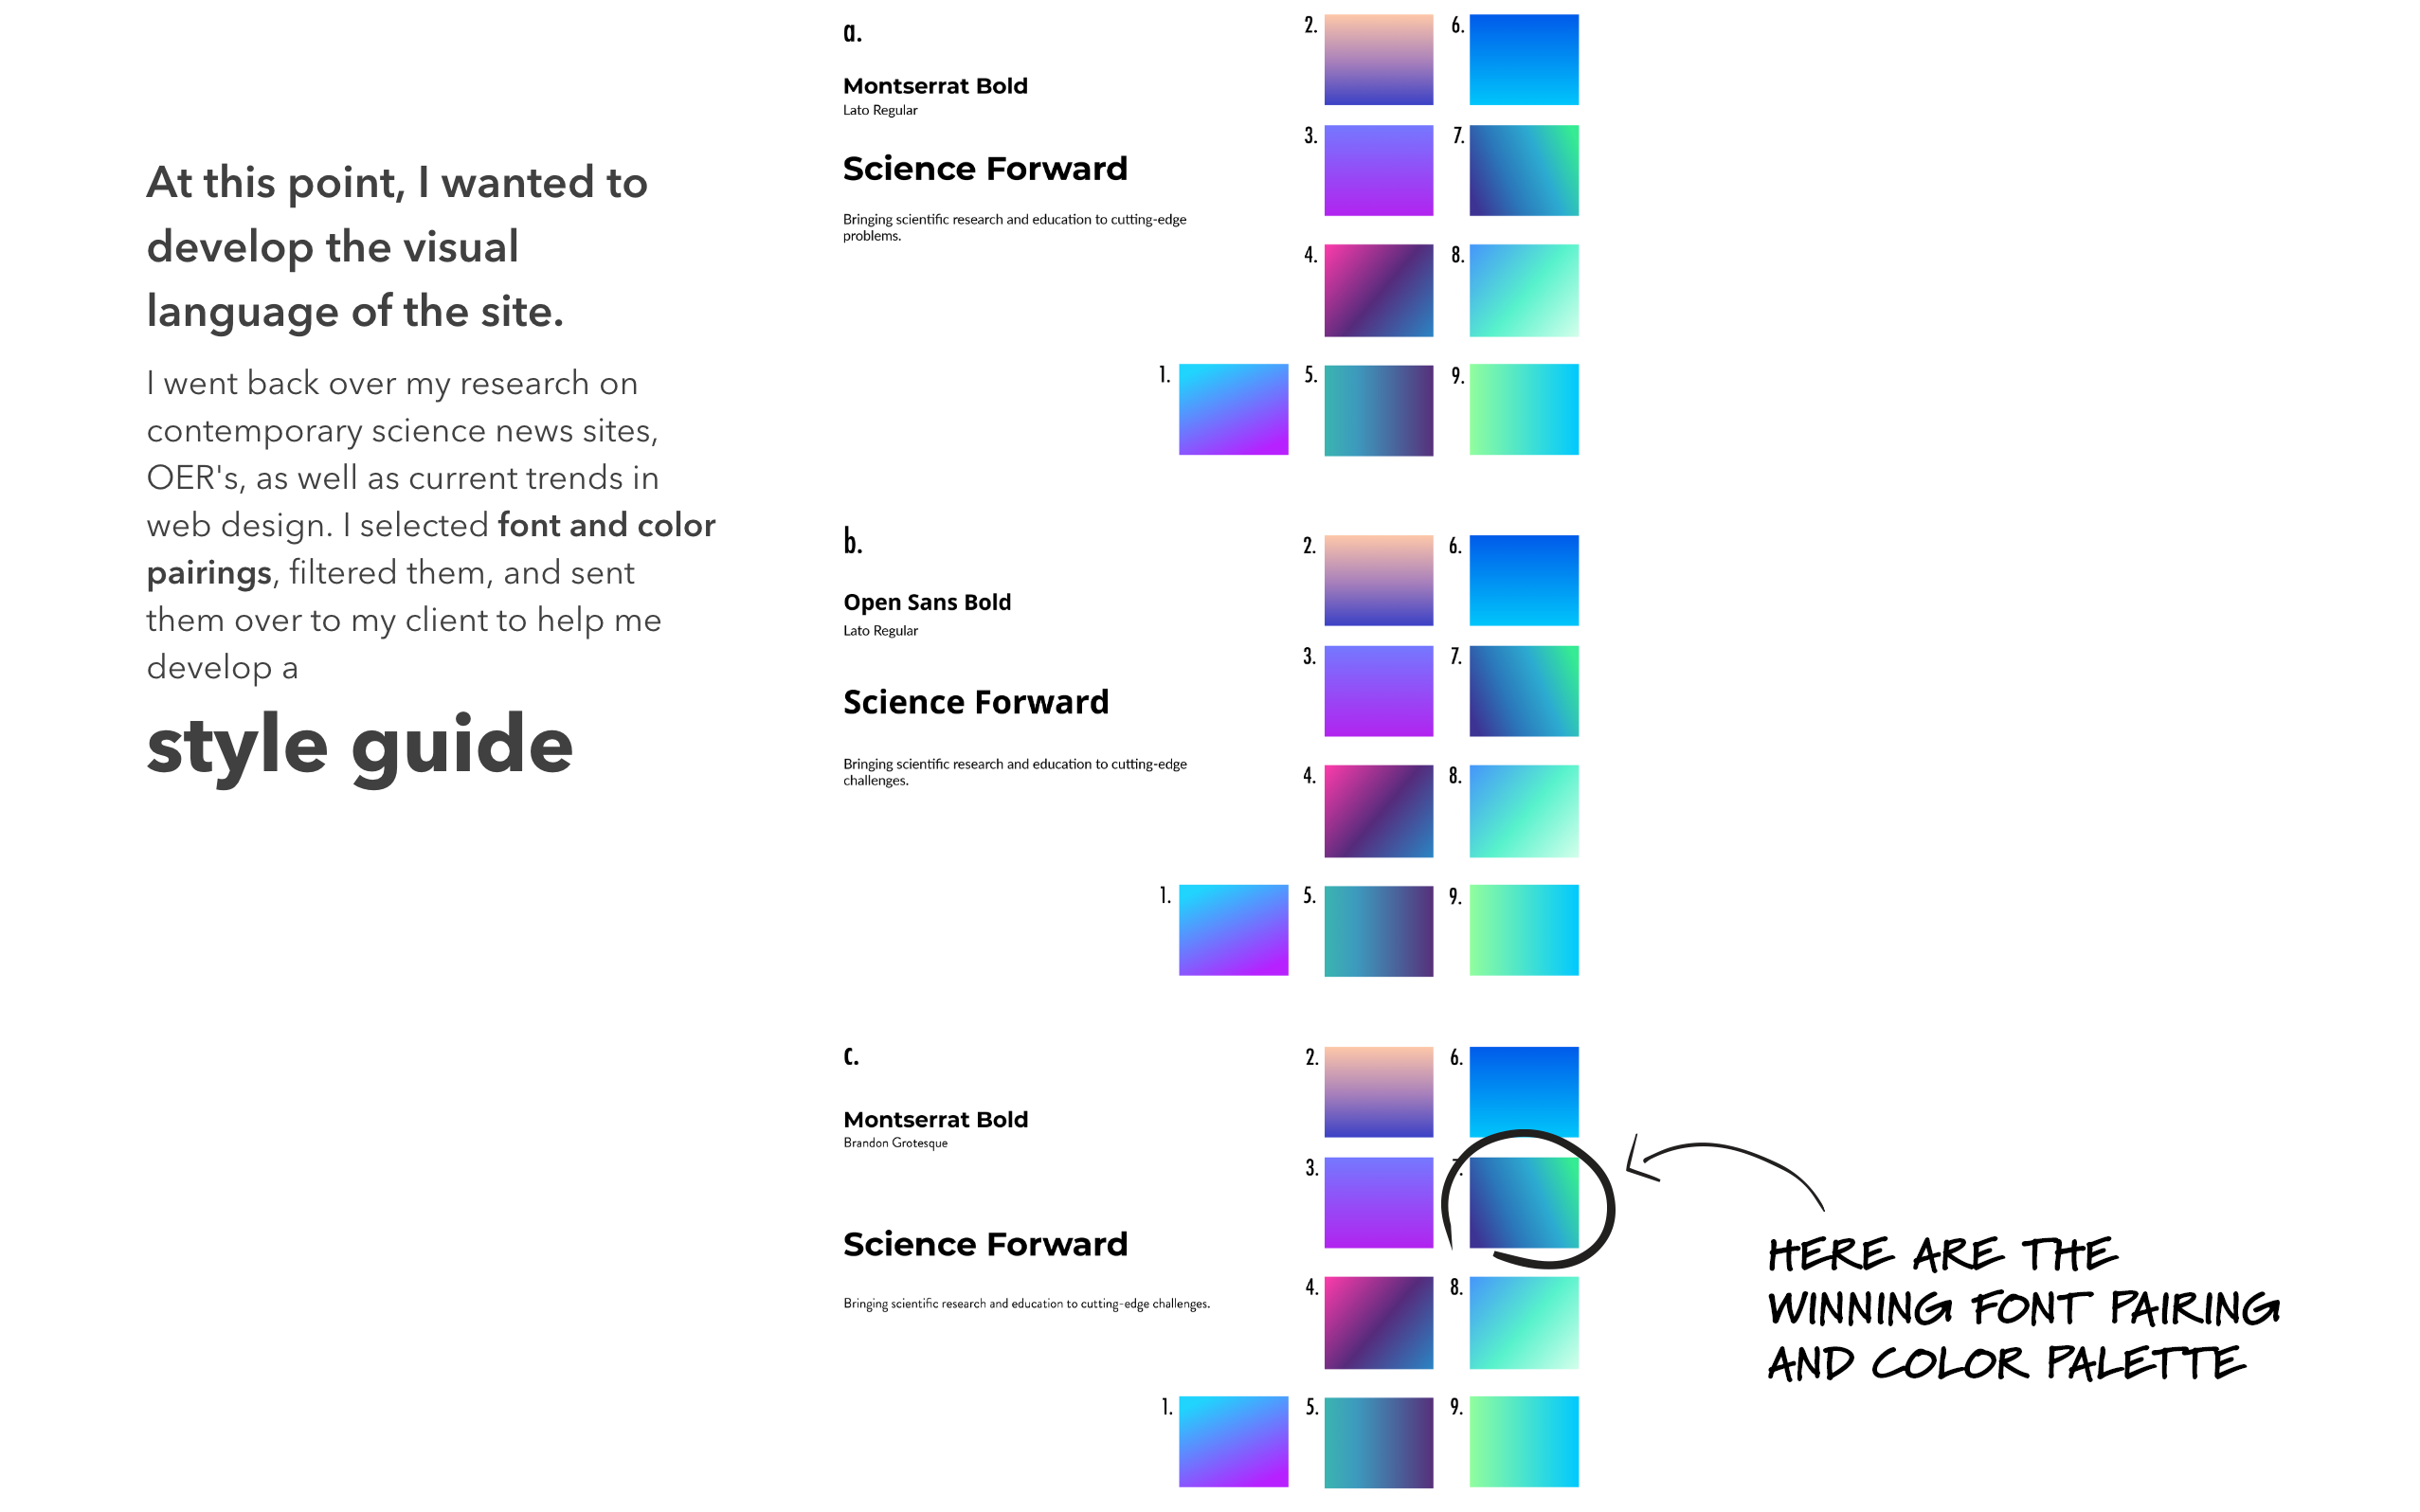 developing color and font pairings for the new site design language